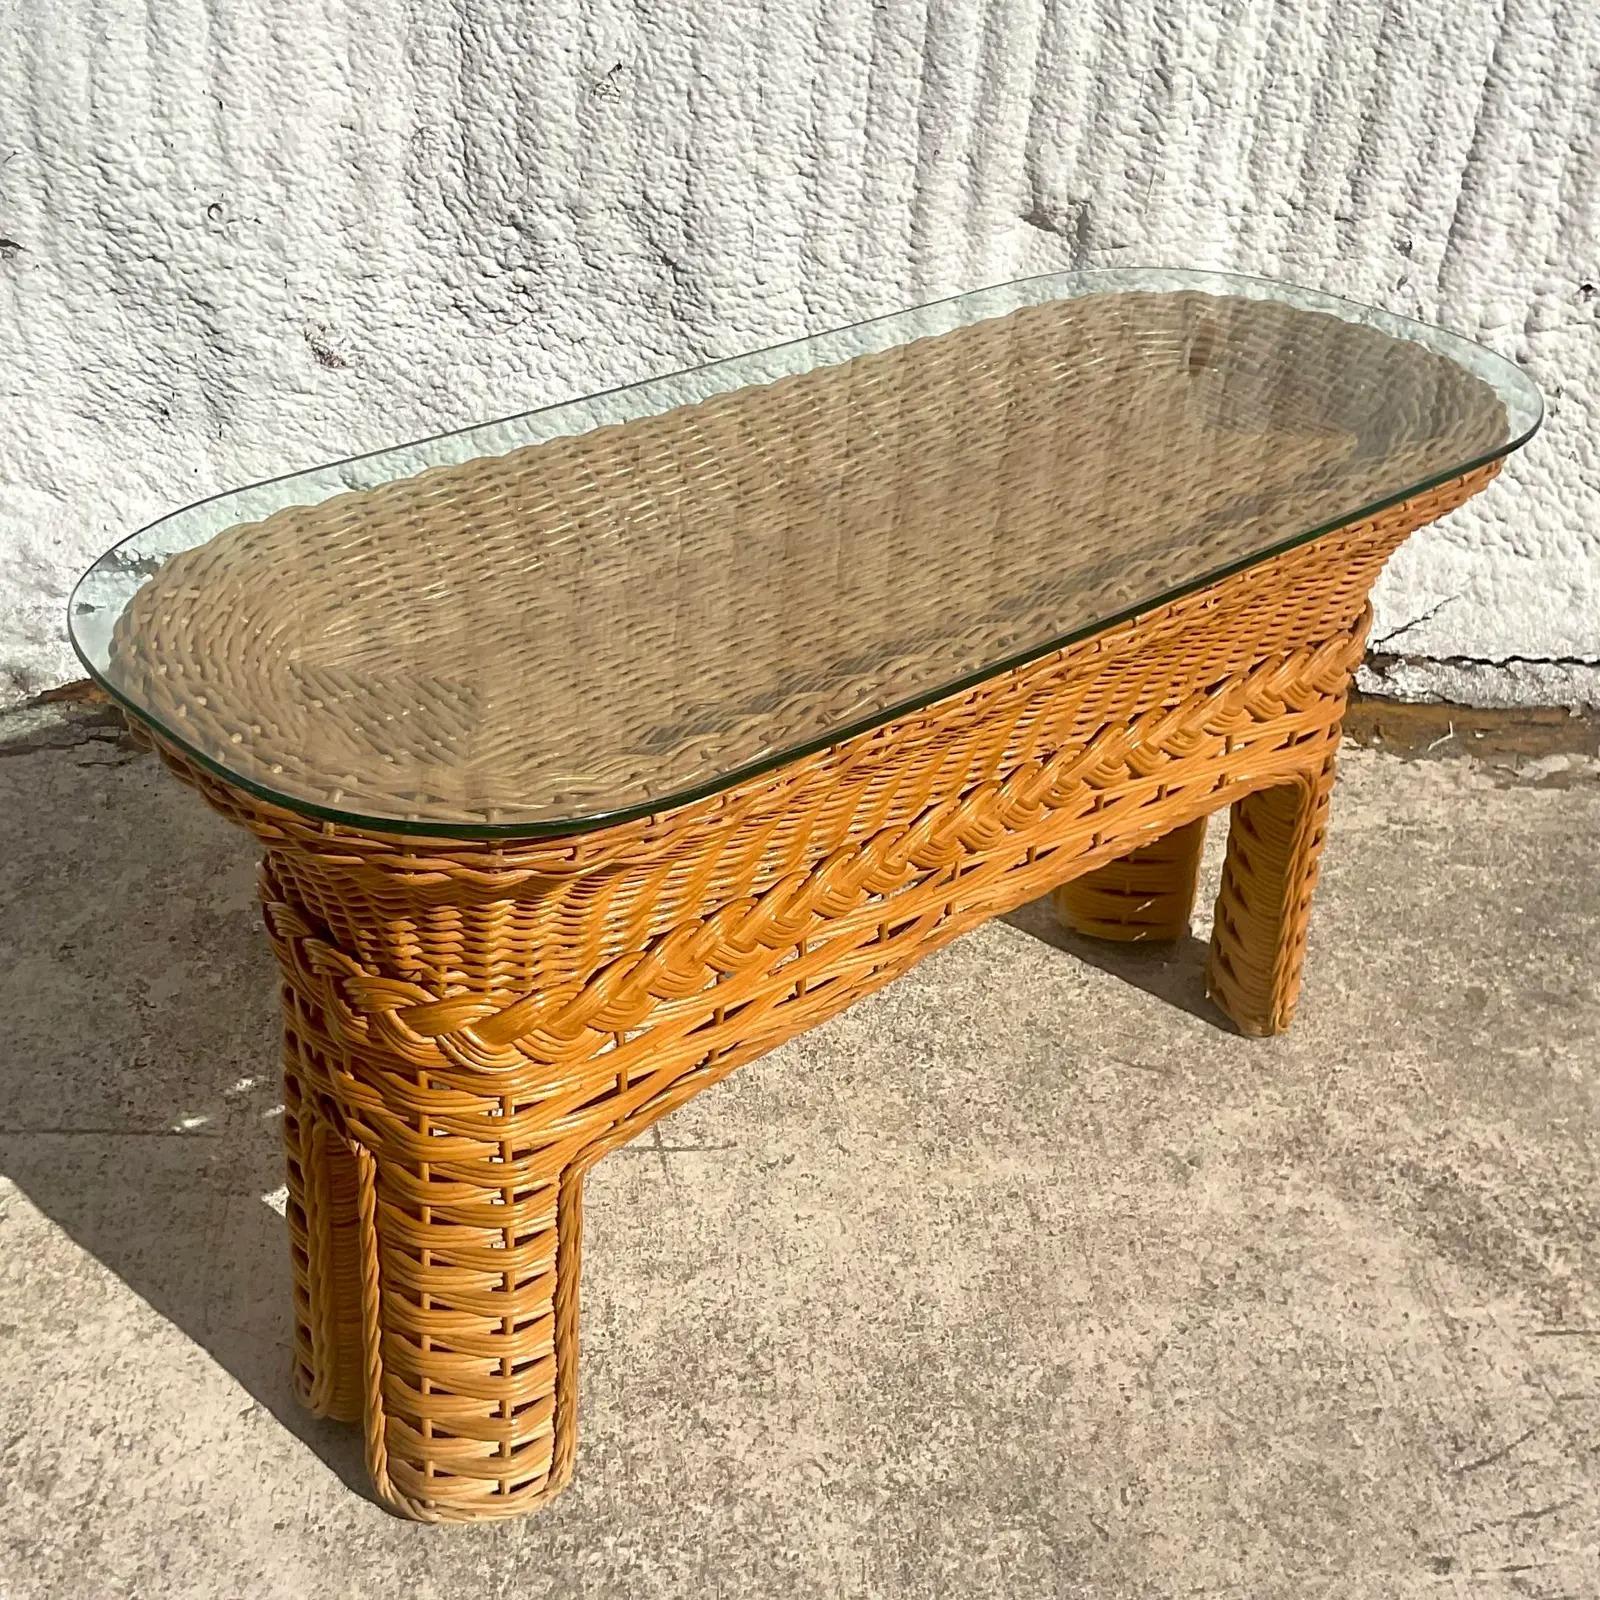 A fantastic vintage Coastal console table. Beautiful woven rattan with a chic braided band detail. Glass top that rests over a shallow valley. Perfect for your shell collection. Acquired from a Palm Beach estate.